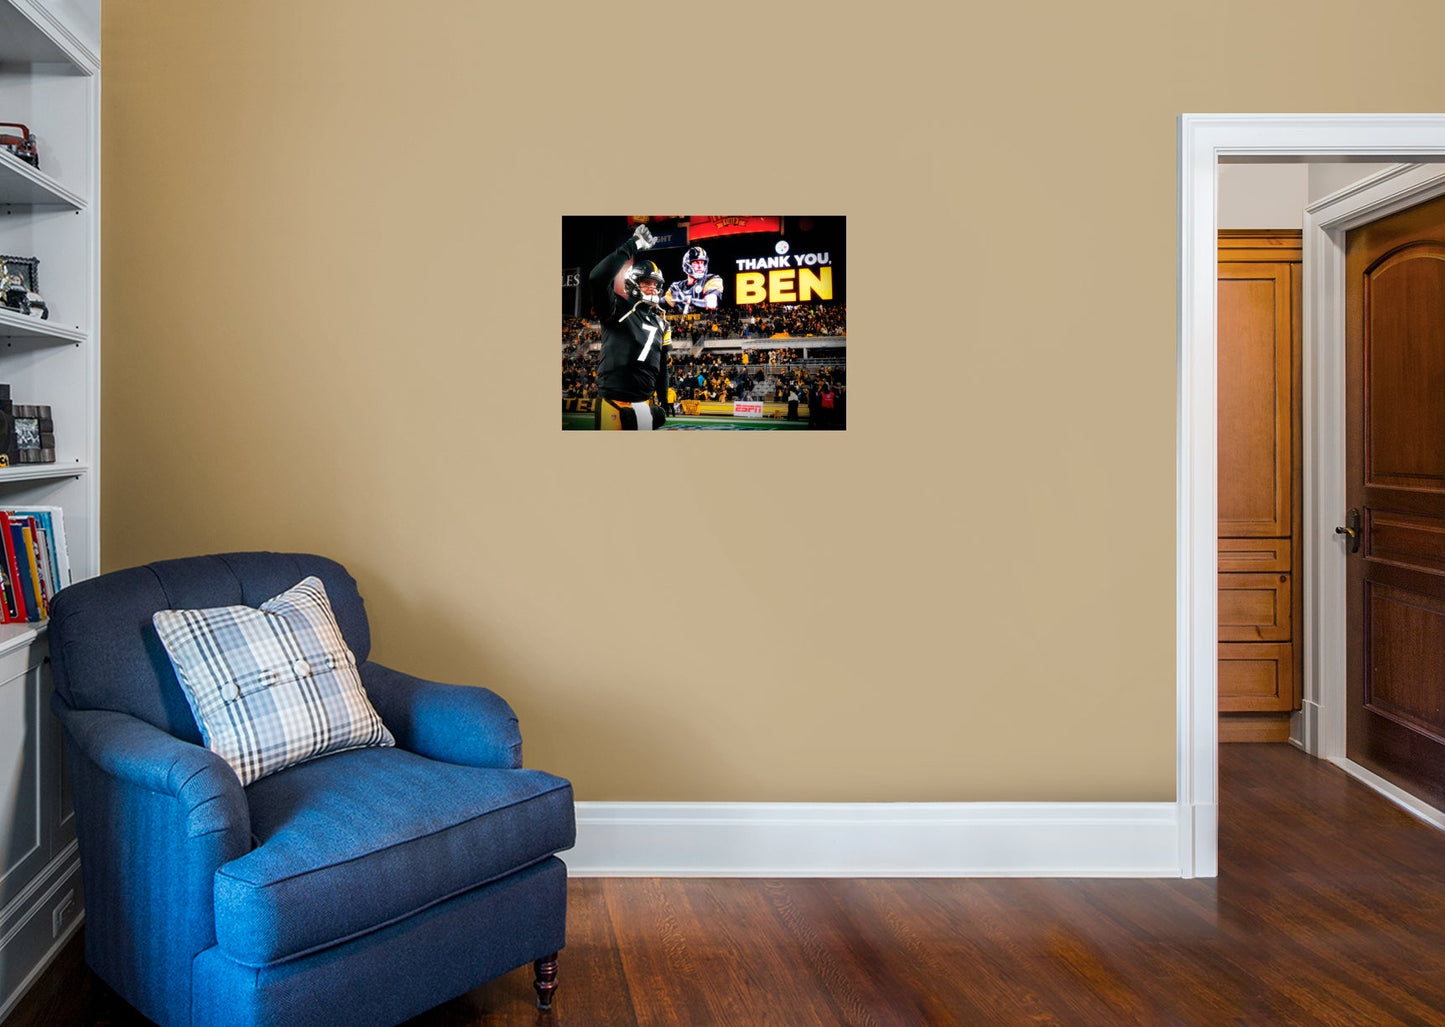 Pittsburgh Steelers: Ben Roethlisberger Last Home Game Poster - Officially Licensed NFL Removable Adhesive Decal